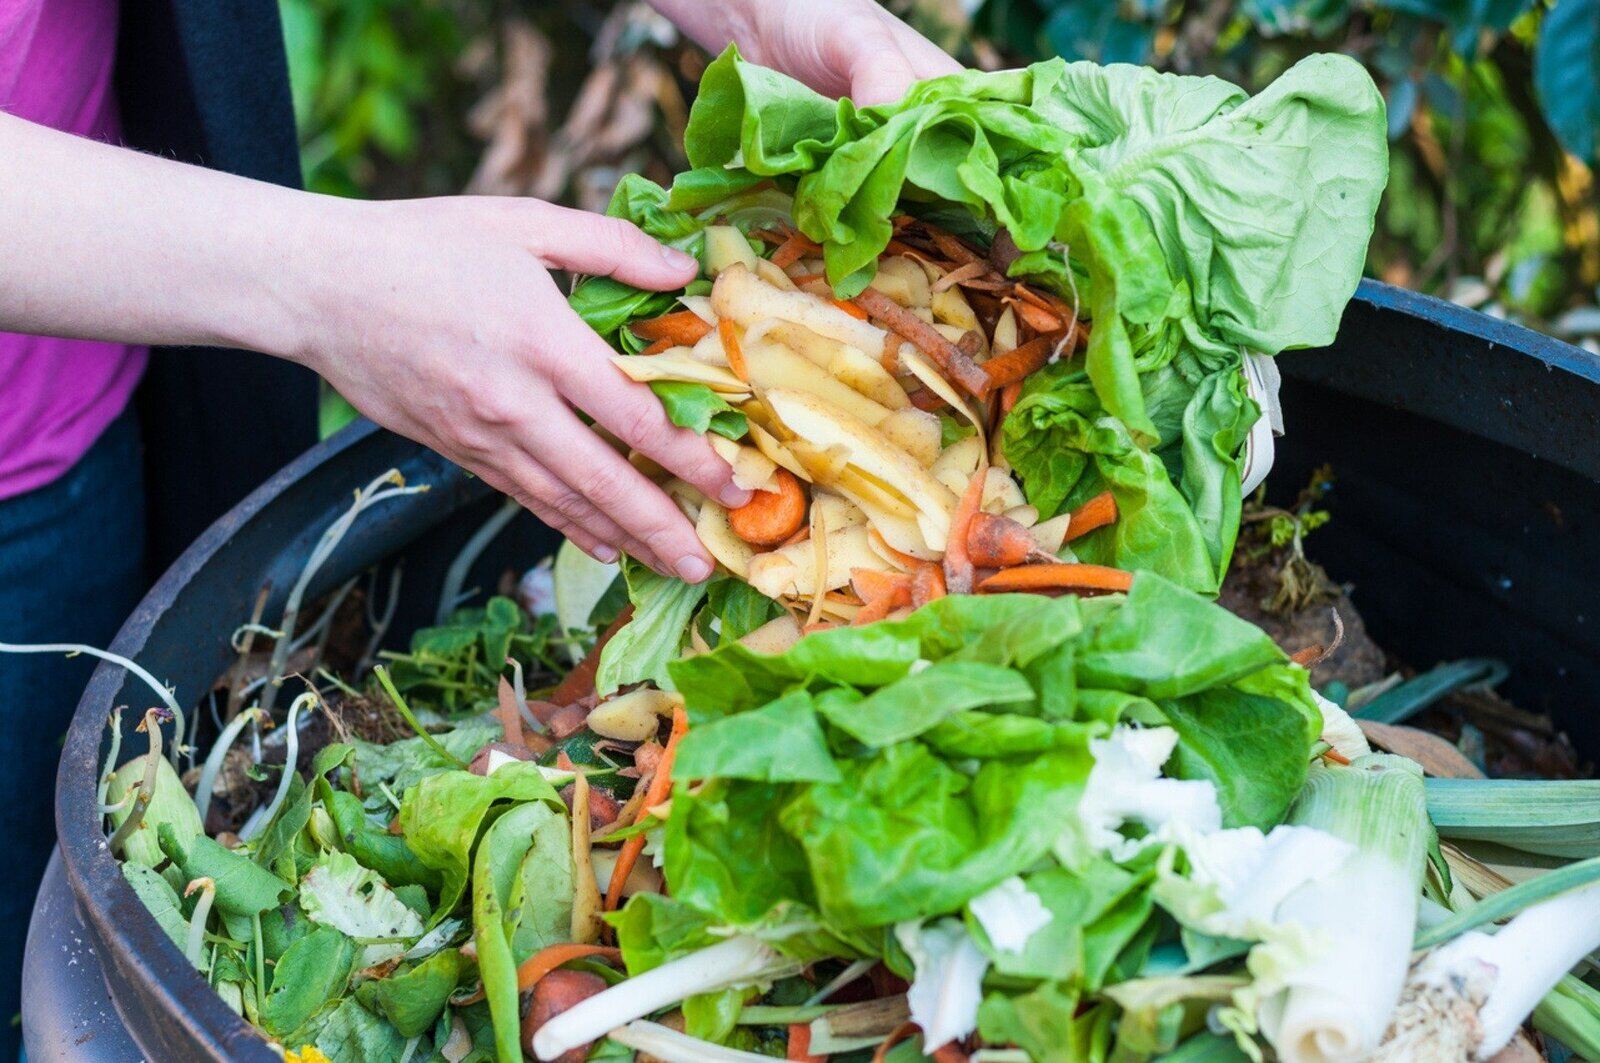 9 Facts About Stop Food Waste Day April 24th 